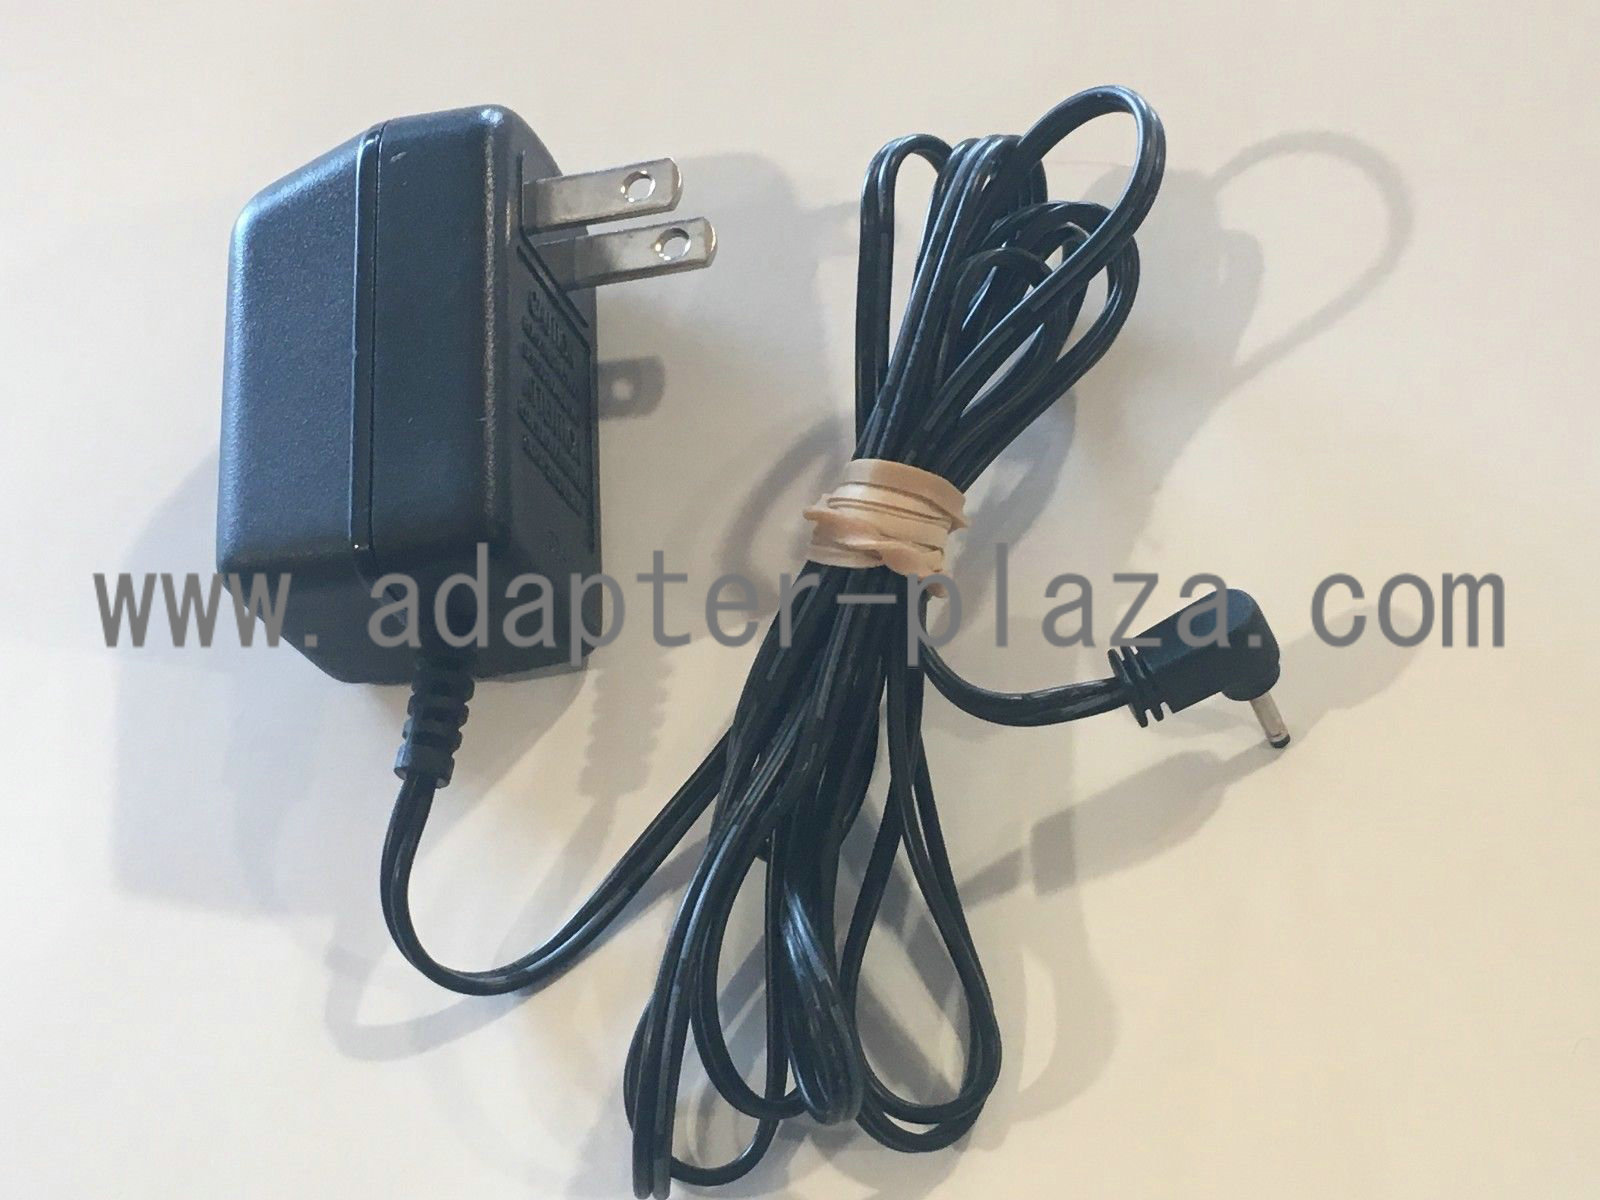 New AT&T VTech U060030A12V 26-160030-2UL-100 6VAC 300mA AC Adapter for VTech DS6522 Phone Base